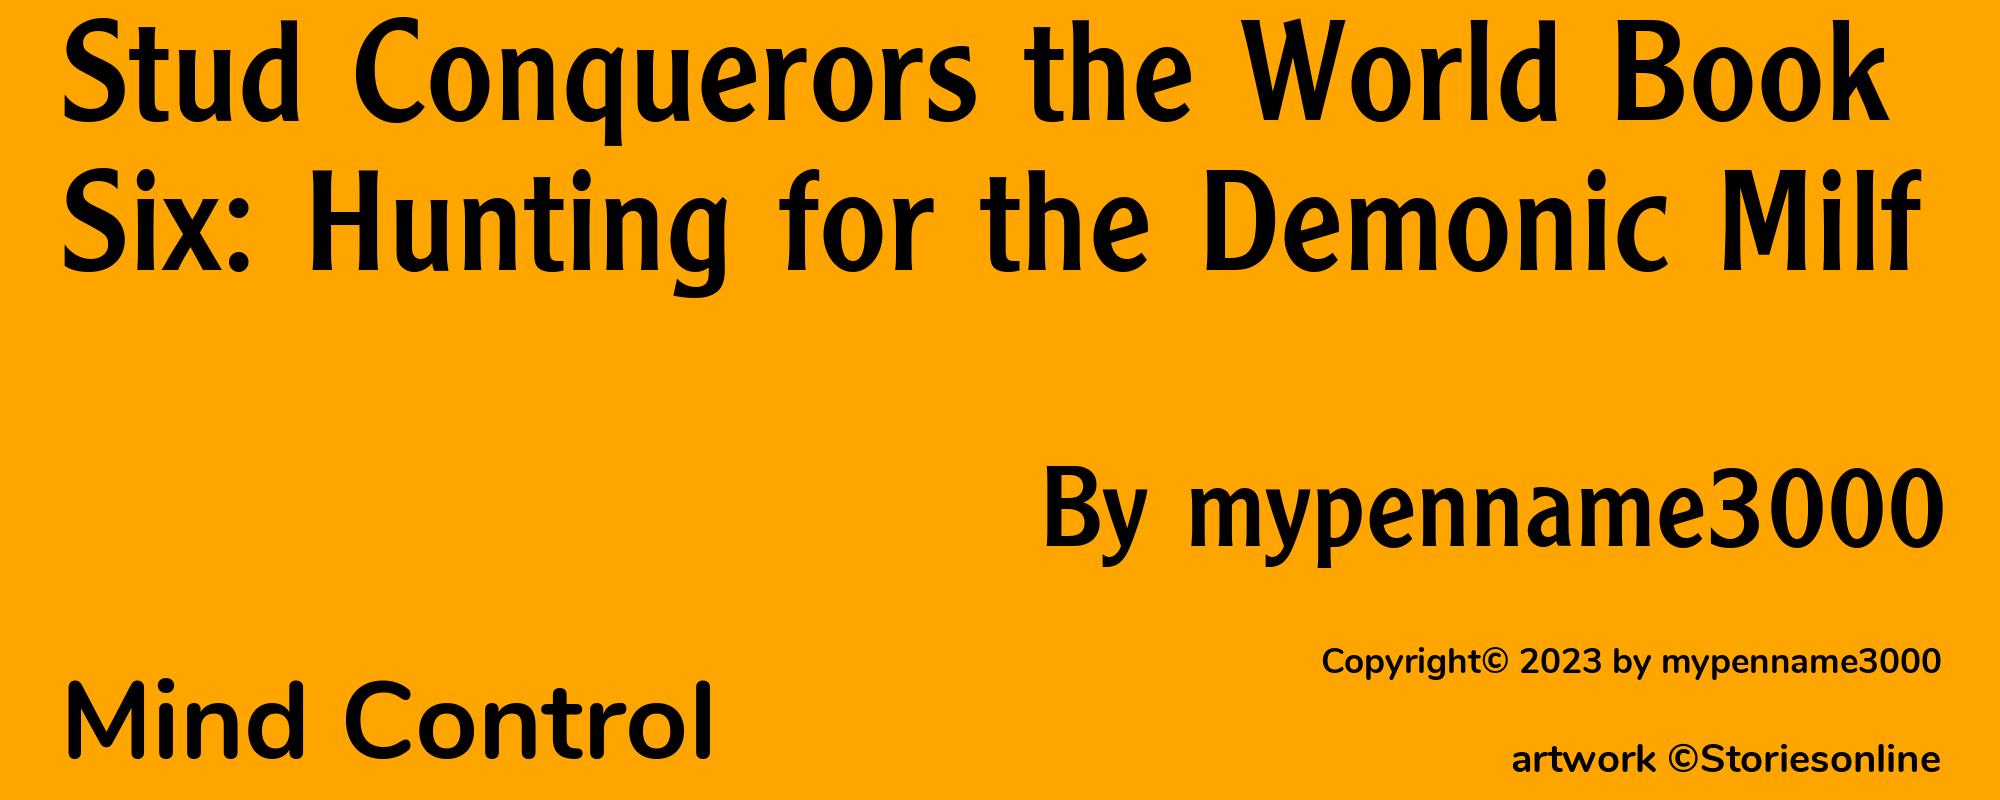 Stud Conquerors the World Book Six: Hunting for the Demonic Milf - Cover